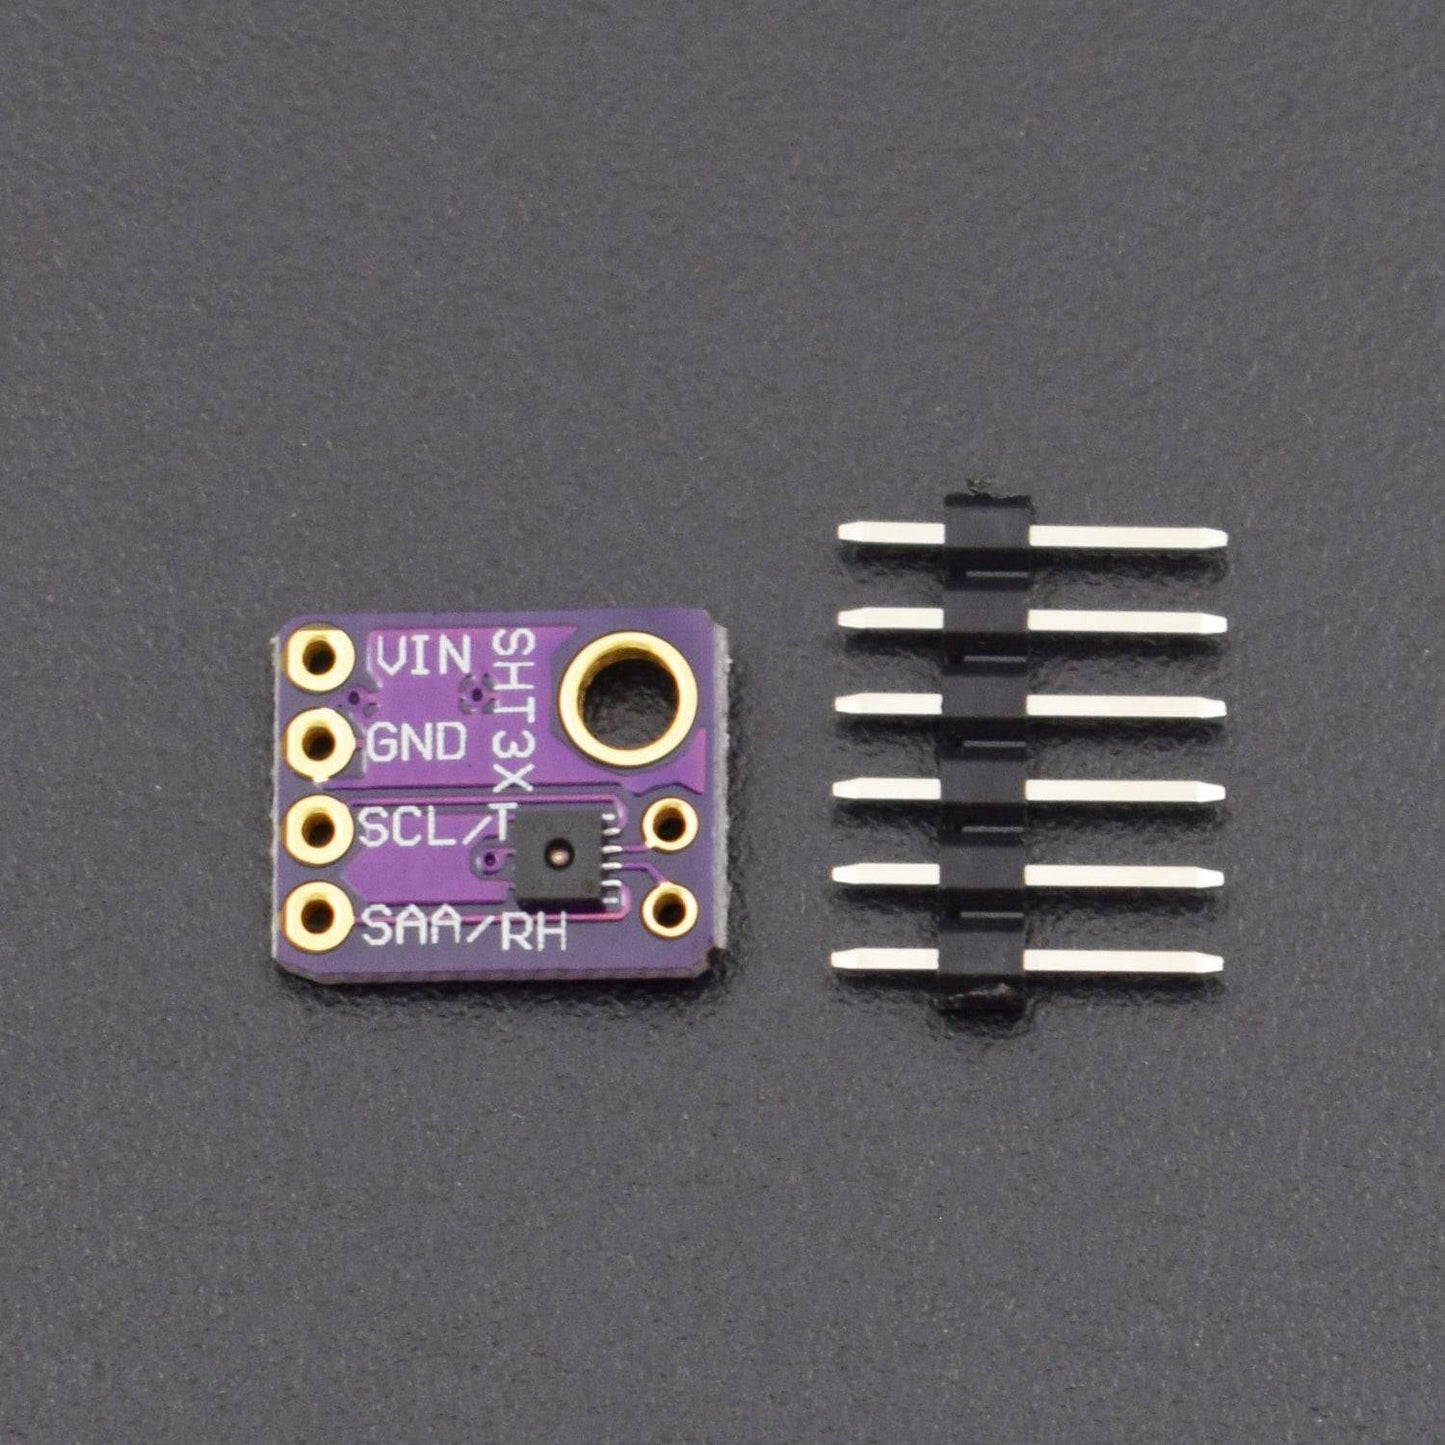 GY-SHT31-D Digital Temperature and Humidity Sensor Module For Arduino - RS1038 - REES52